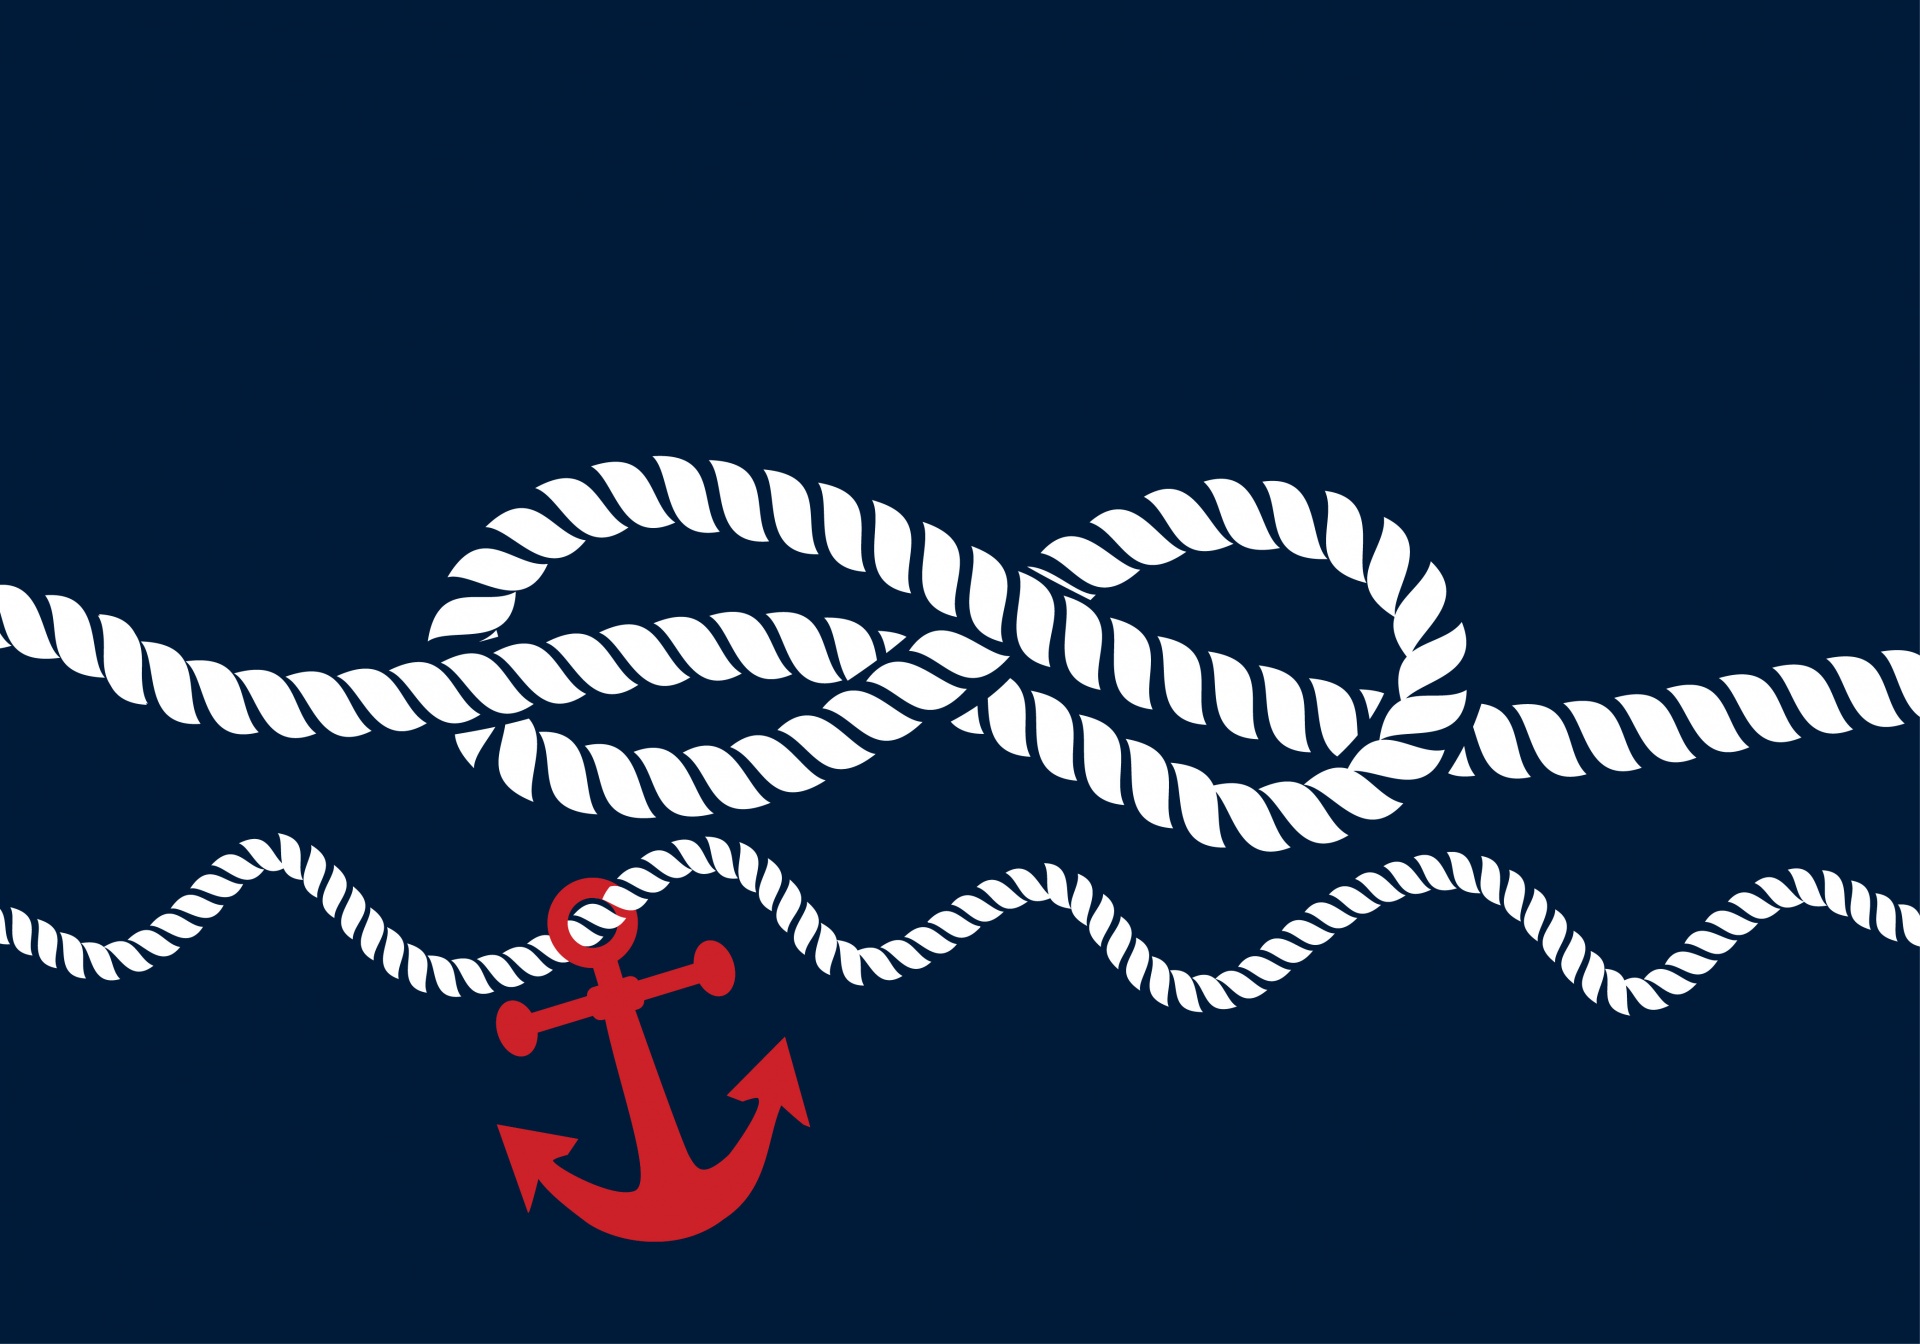 Nautical Rope Knot Background